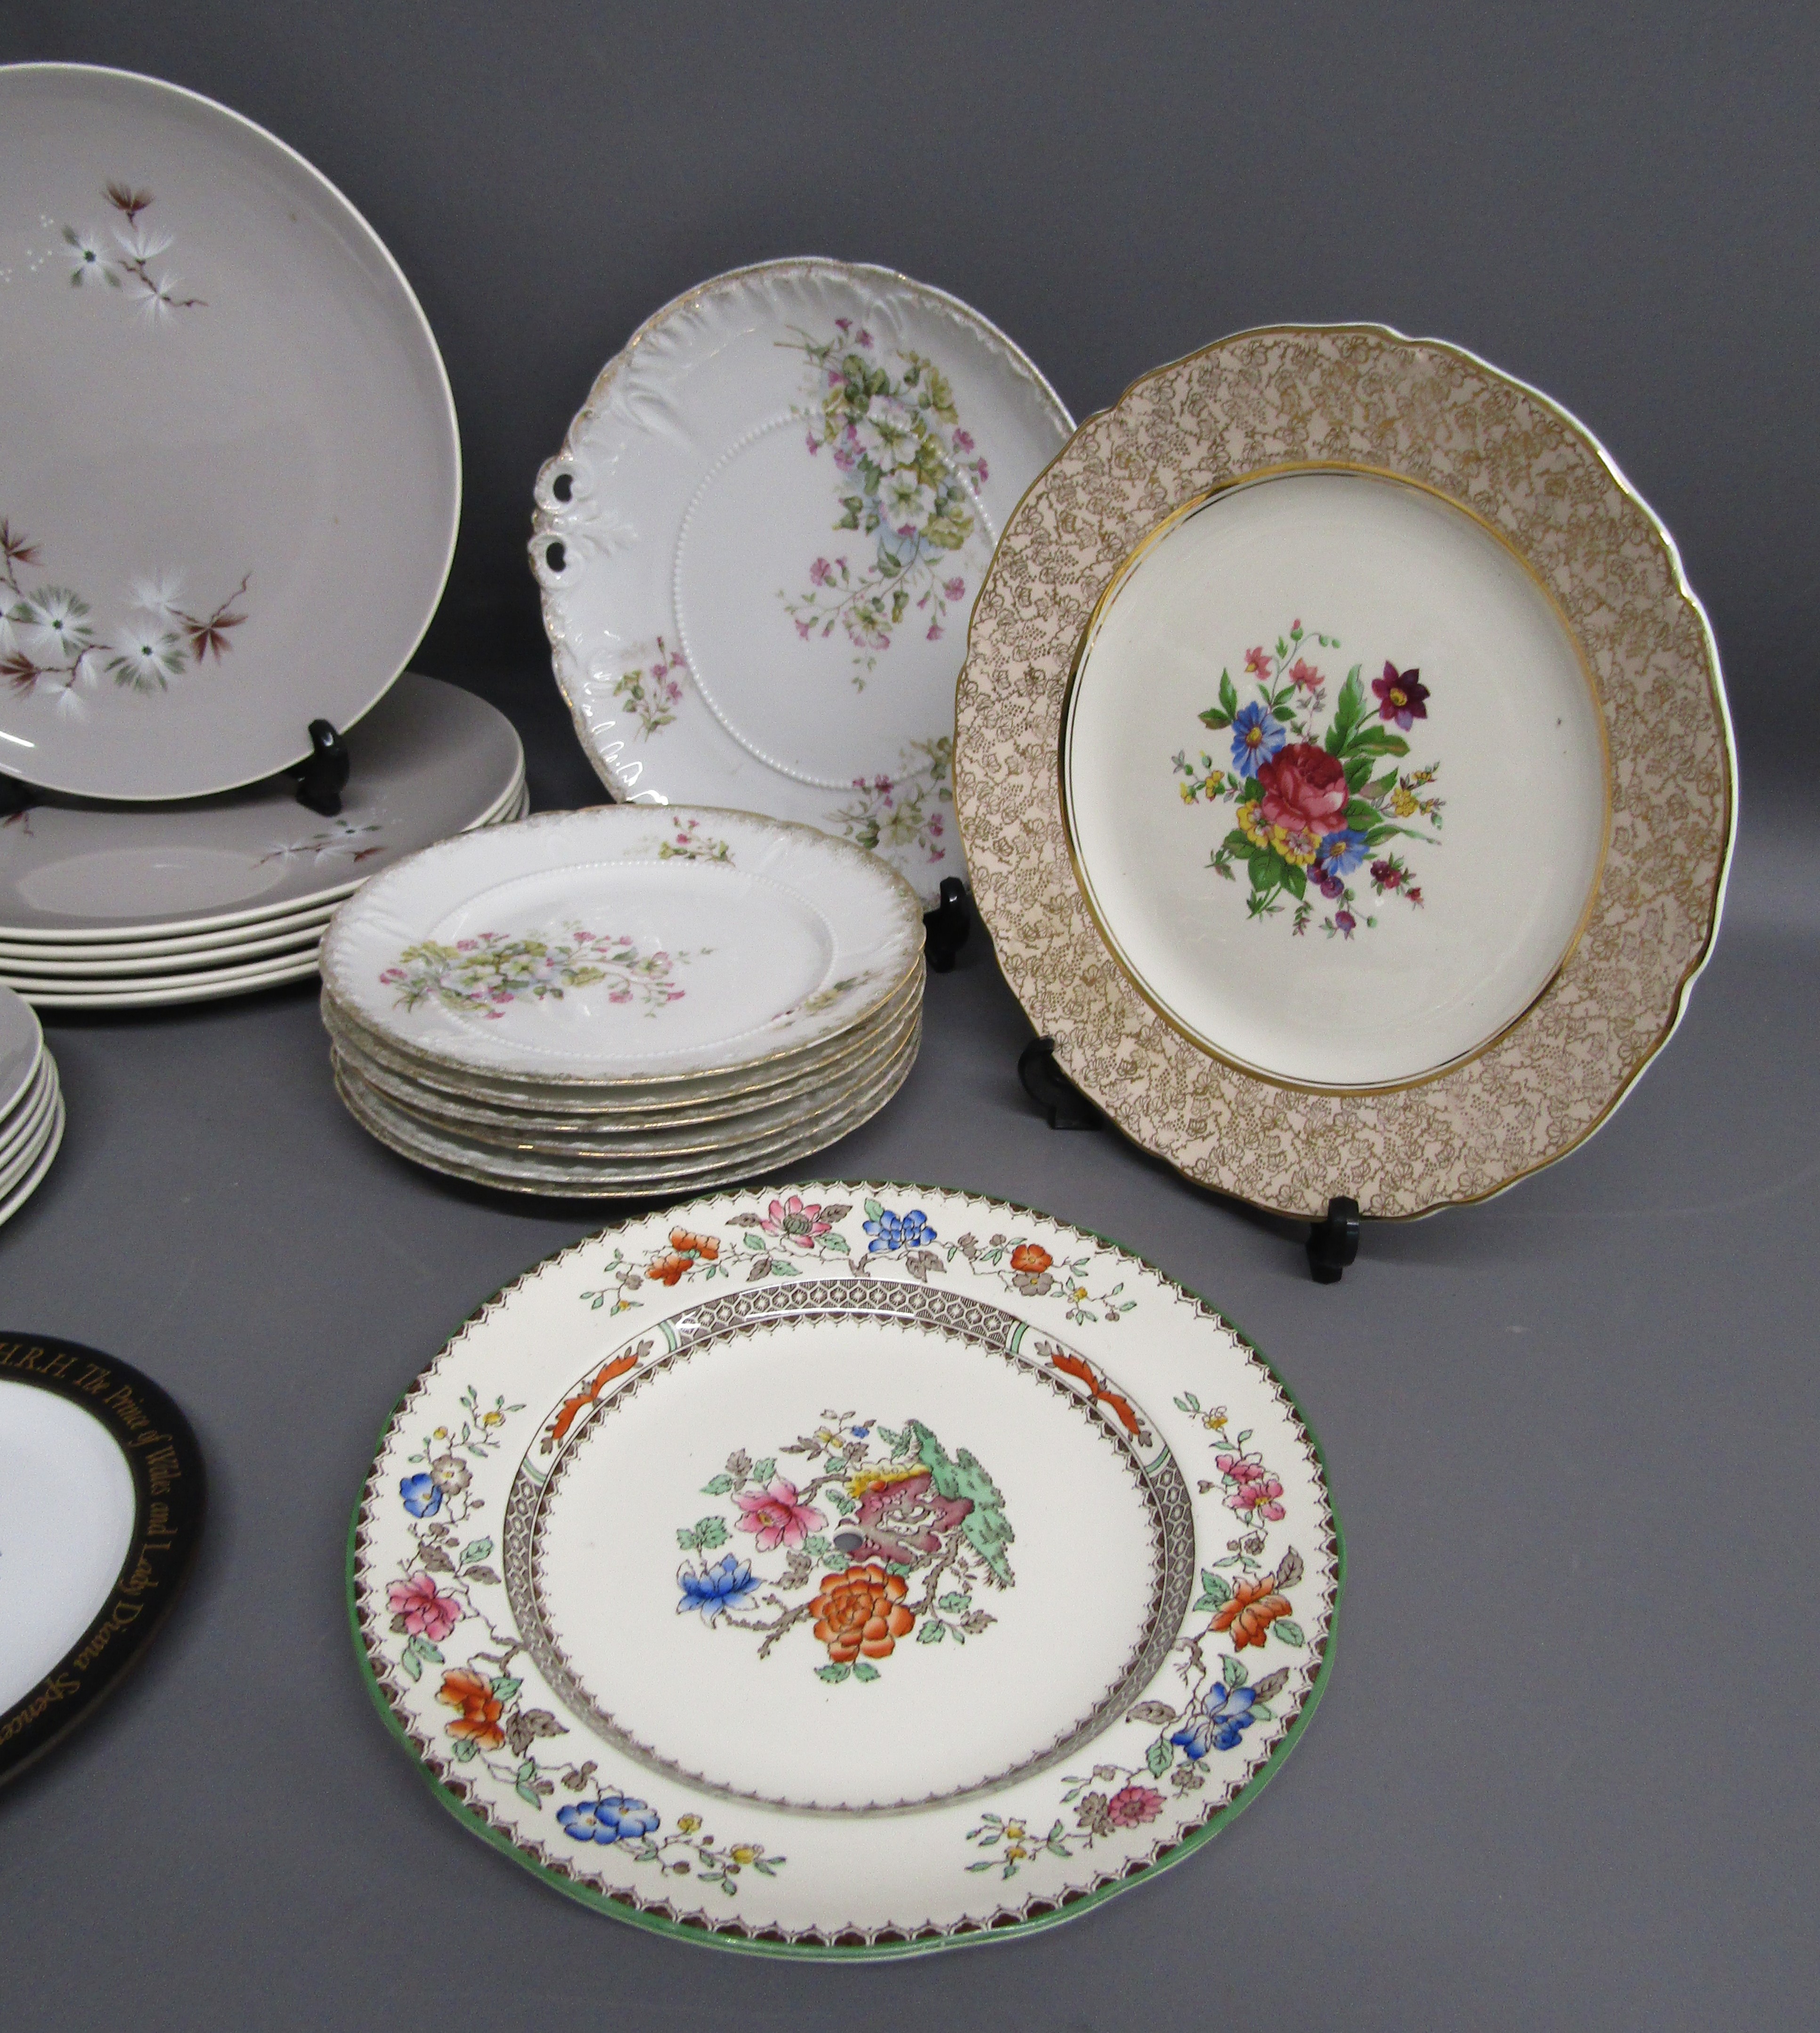 Royal Doulton Frost Pine plates and bowls, Carl Tielsch 70570 cake plate and plates, Midwinter - Bild 4 aus 5